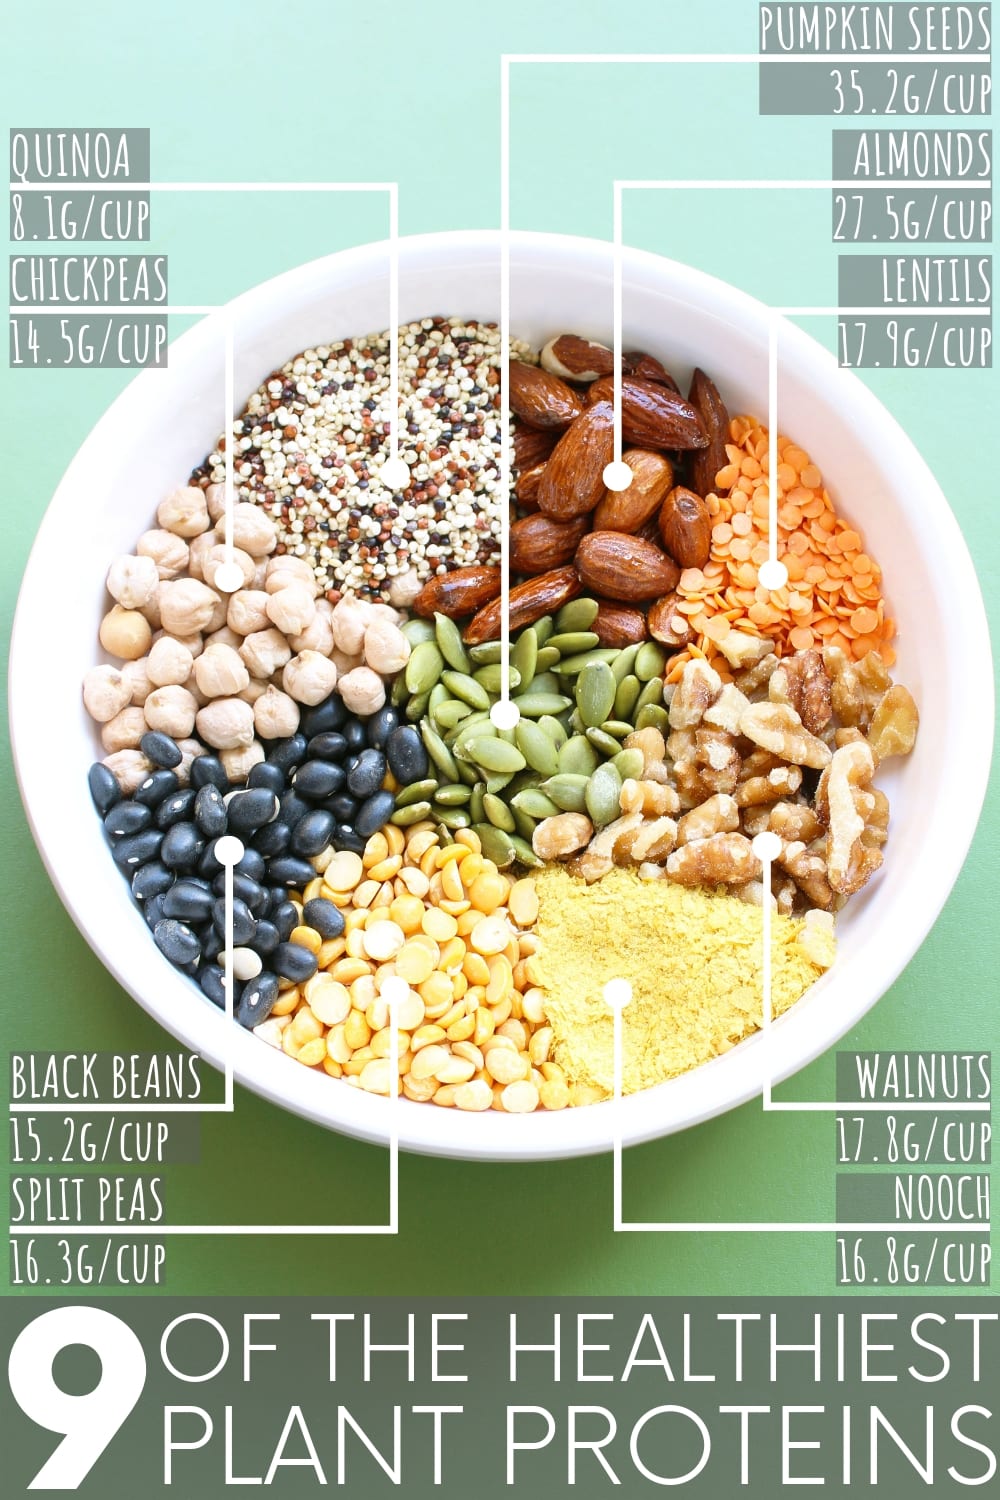 What are the best plant protein foods and just how much protein is in each? Almonds, chickpeas, quinoa, a seasoning that subs for cheese - and more!